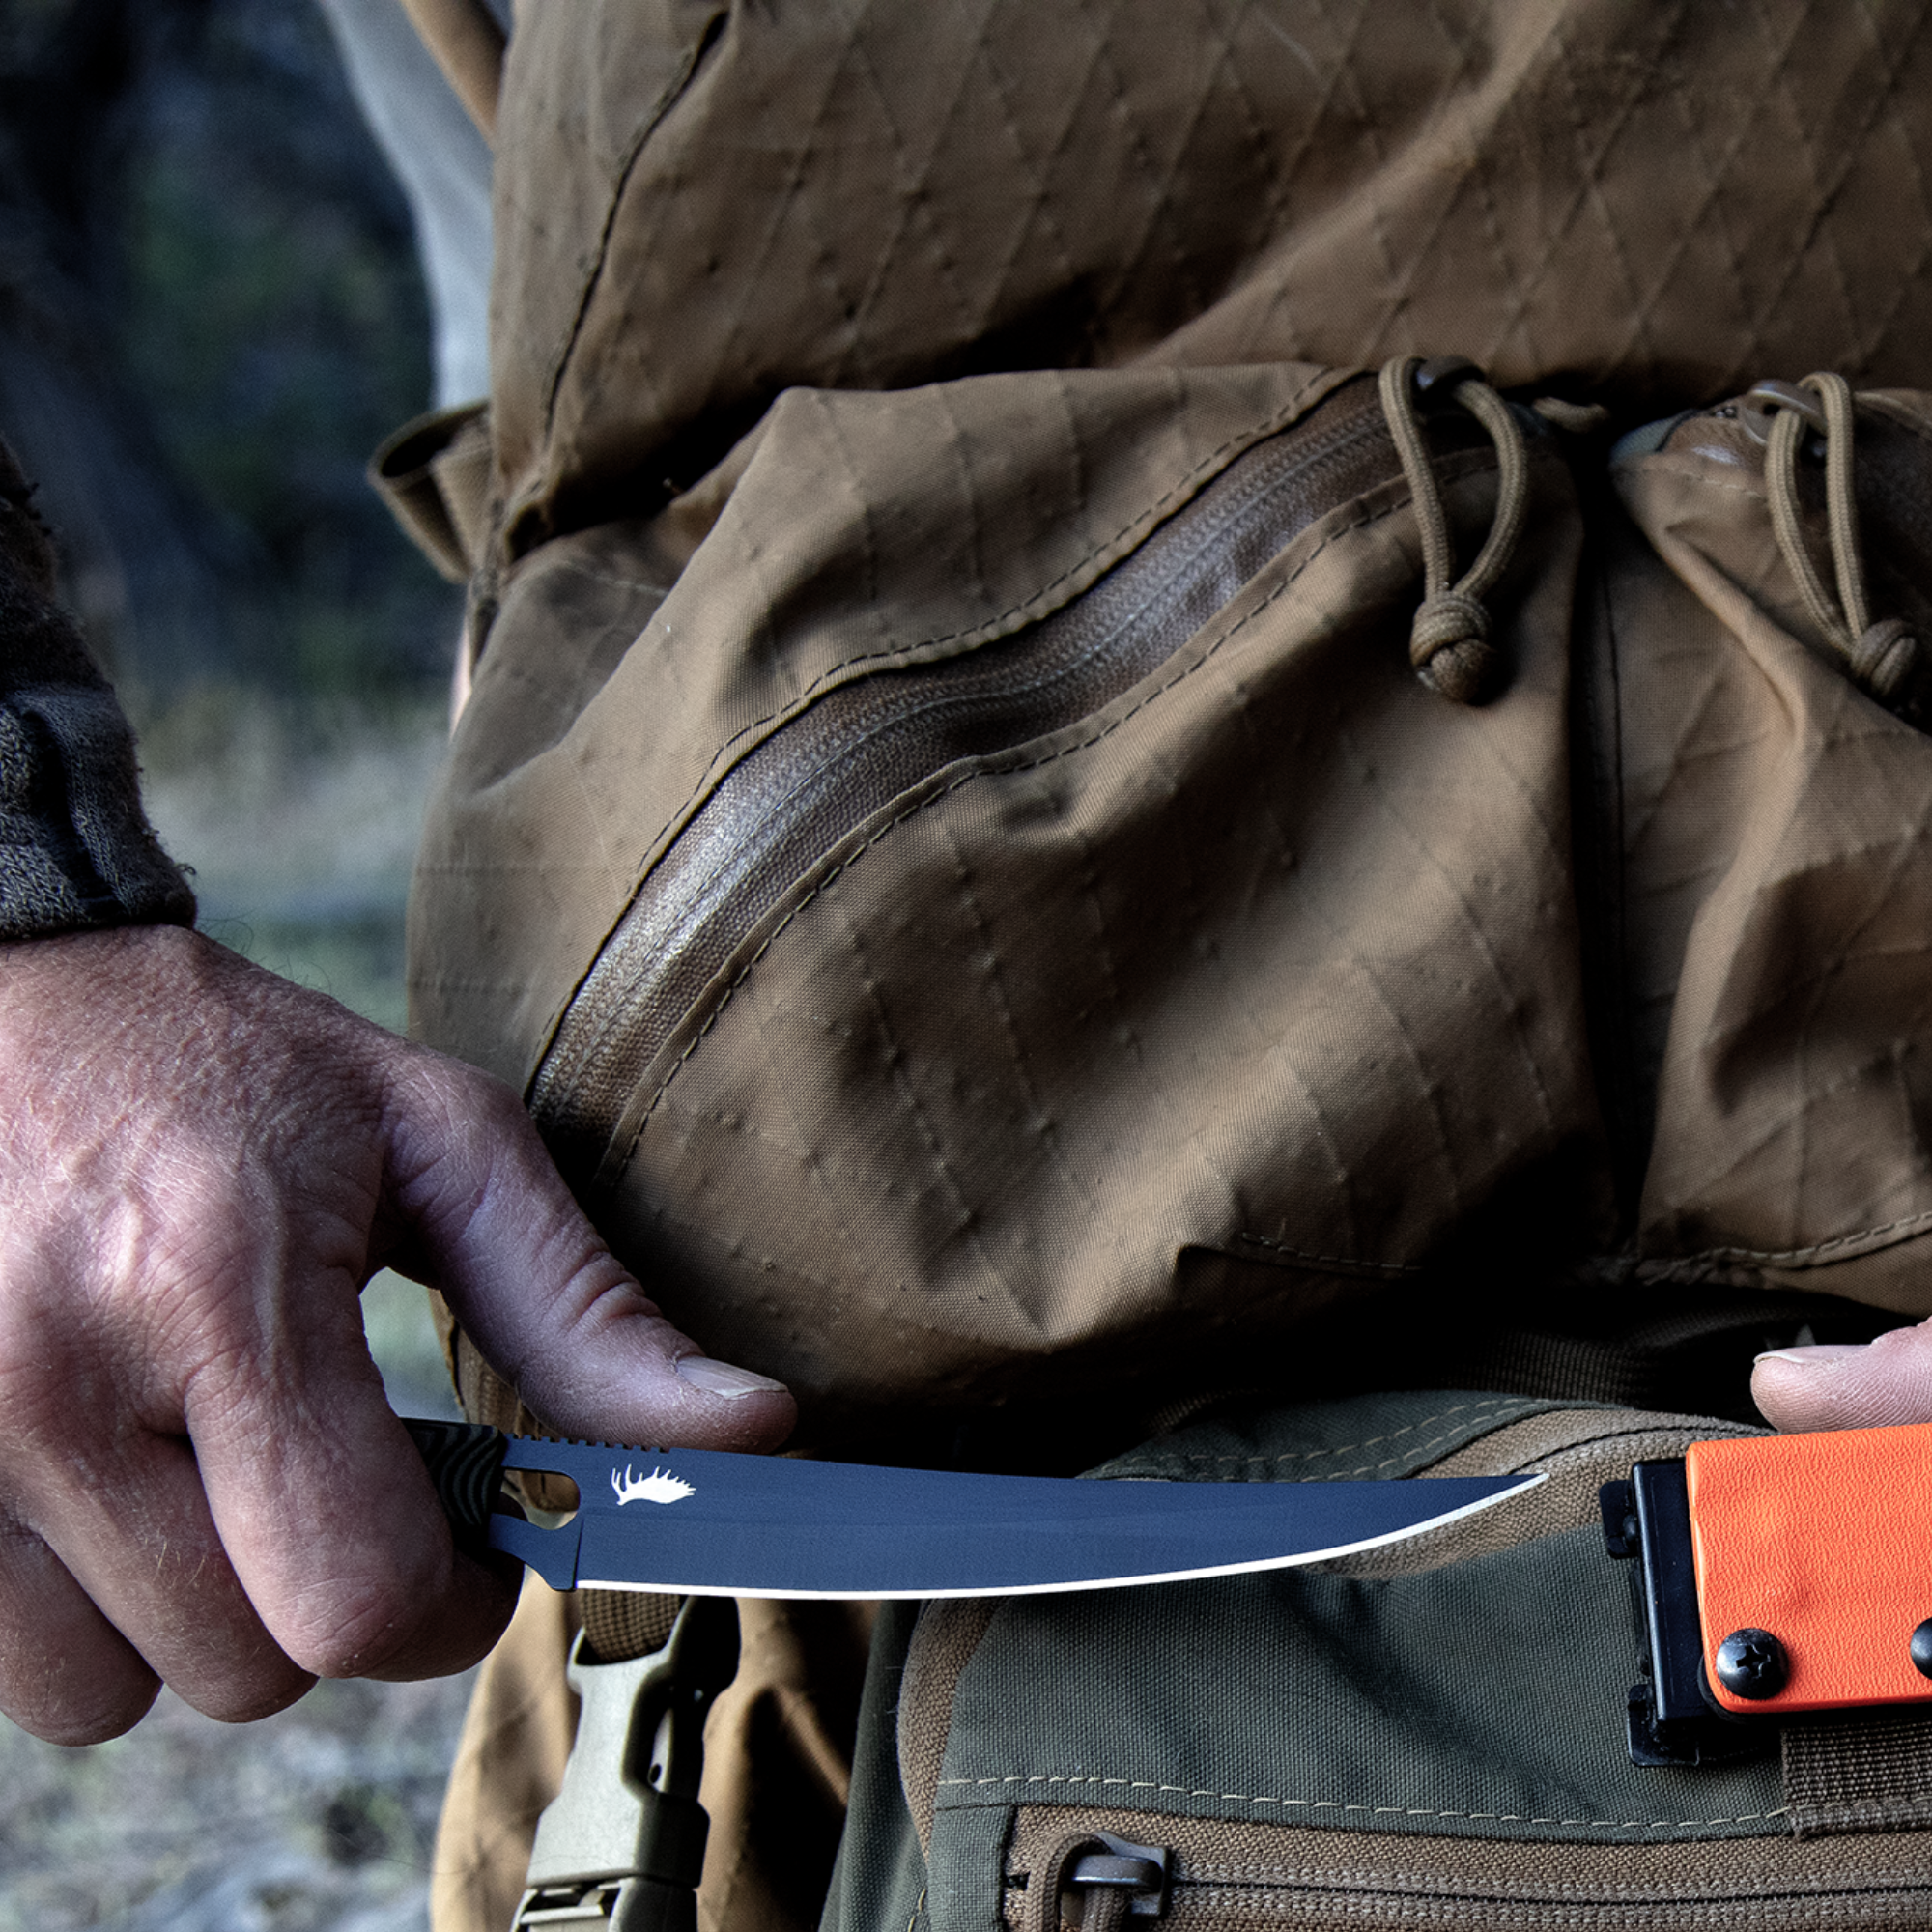 K3 Ultralight Boning Knife for Bow Hunters being unsheathed over a backpack, but a square photo version